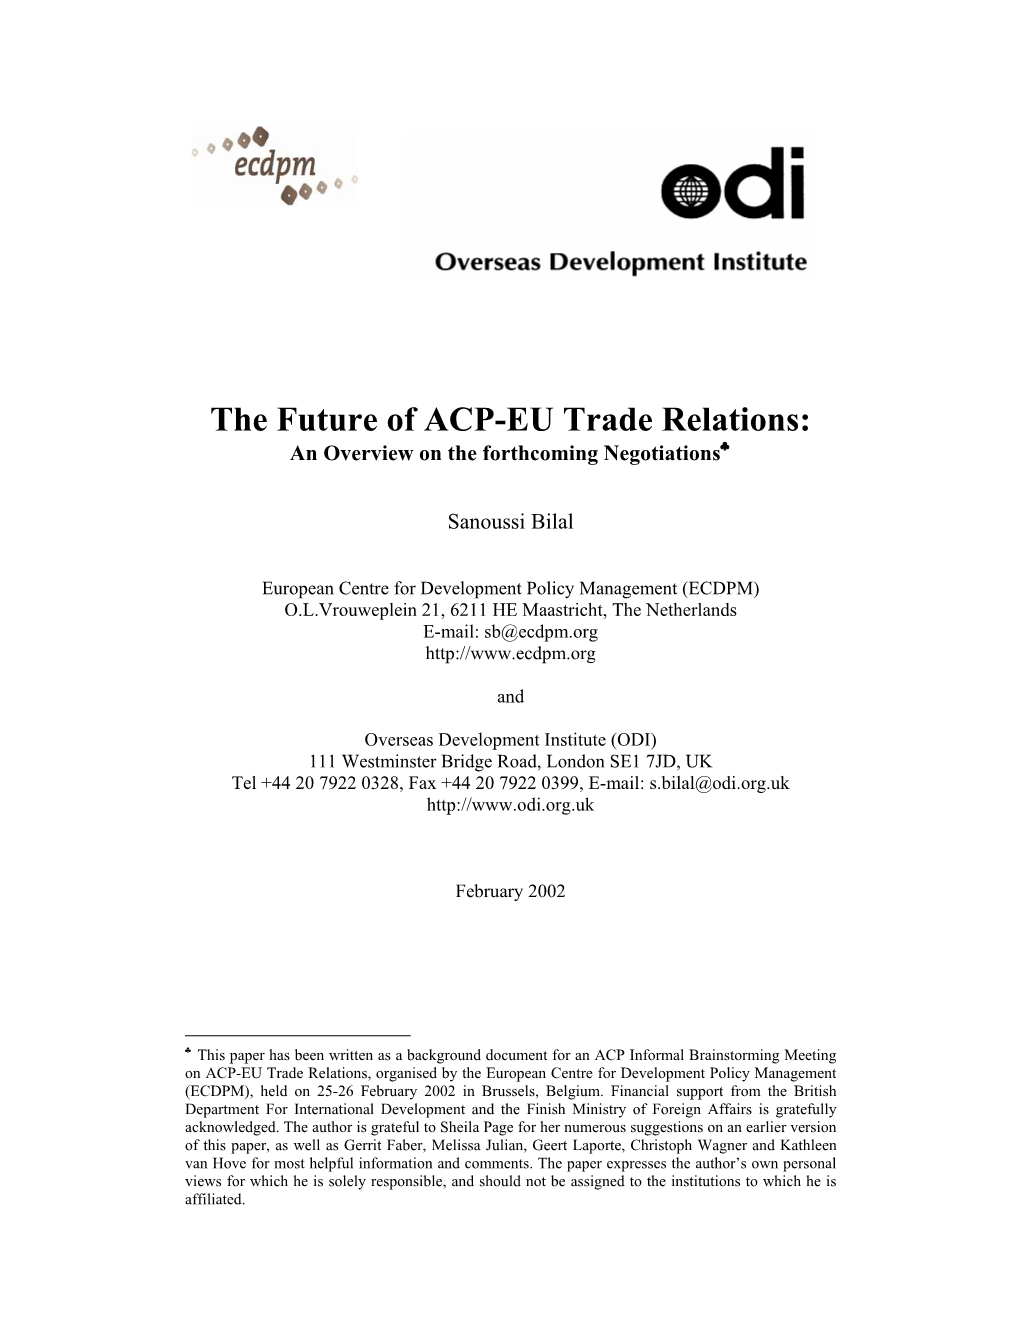 The Future of ACP-EU Trade Relations: an Overview on the Forthcoming Negotiations♣